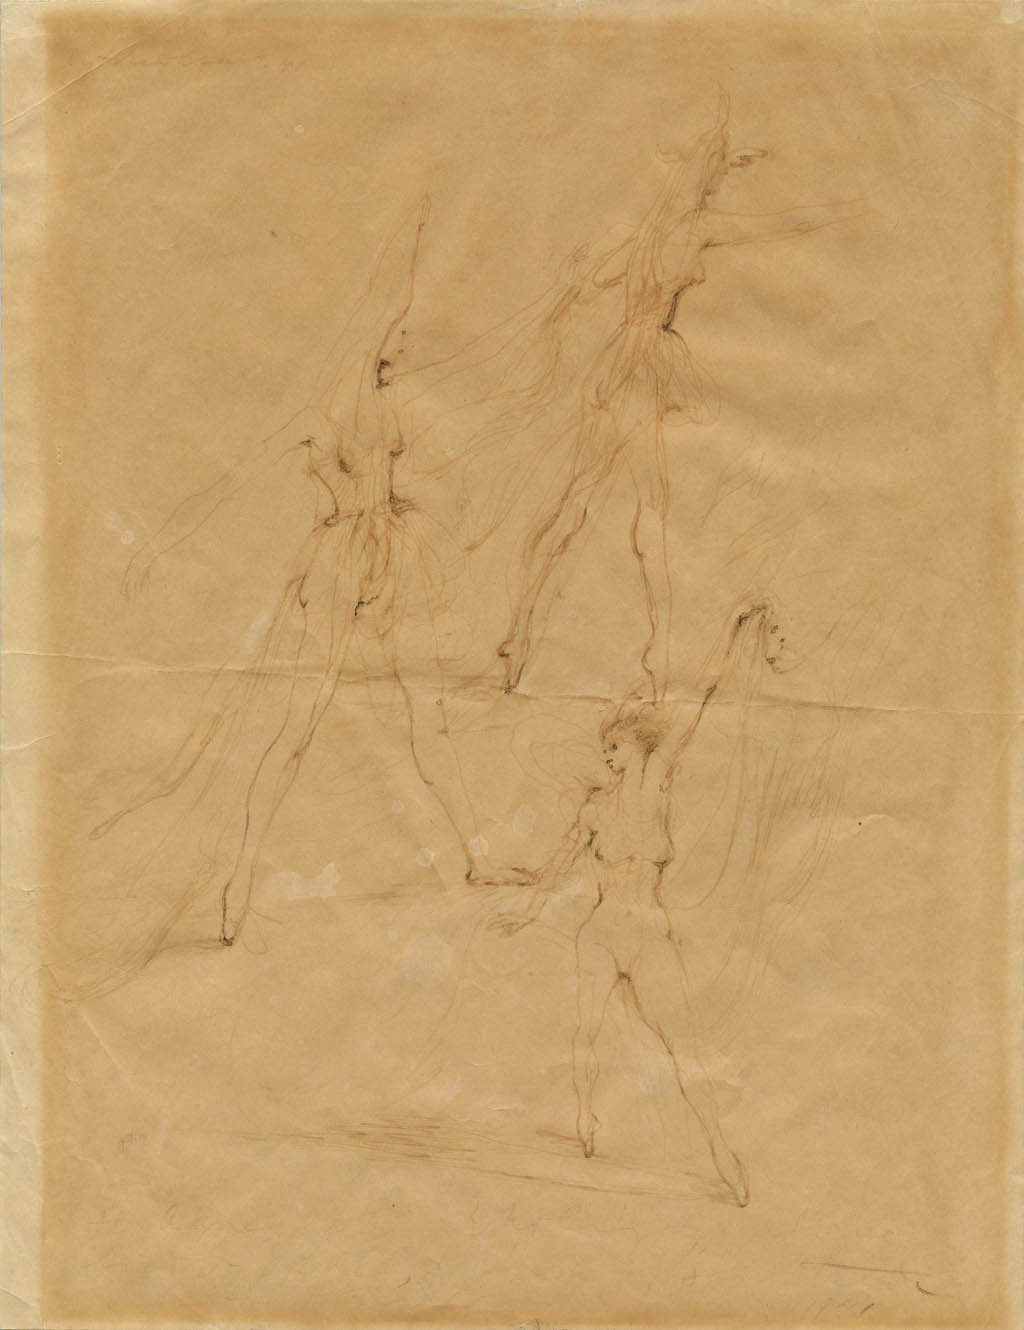 Pavel Tchelitchew - [Costumed Dancers] - 1941 sepia ink on paper